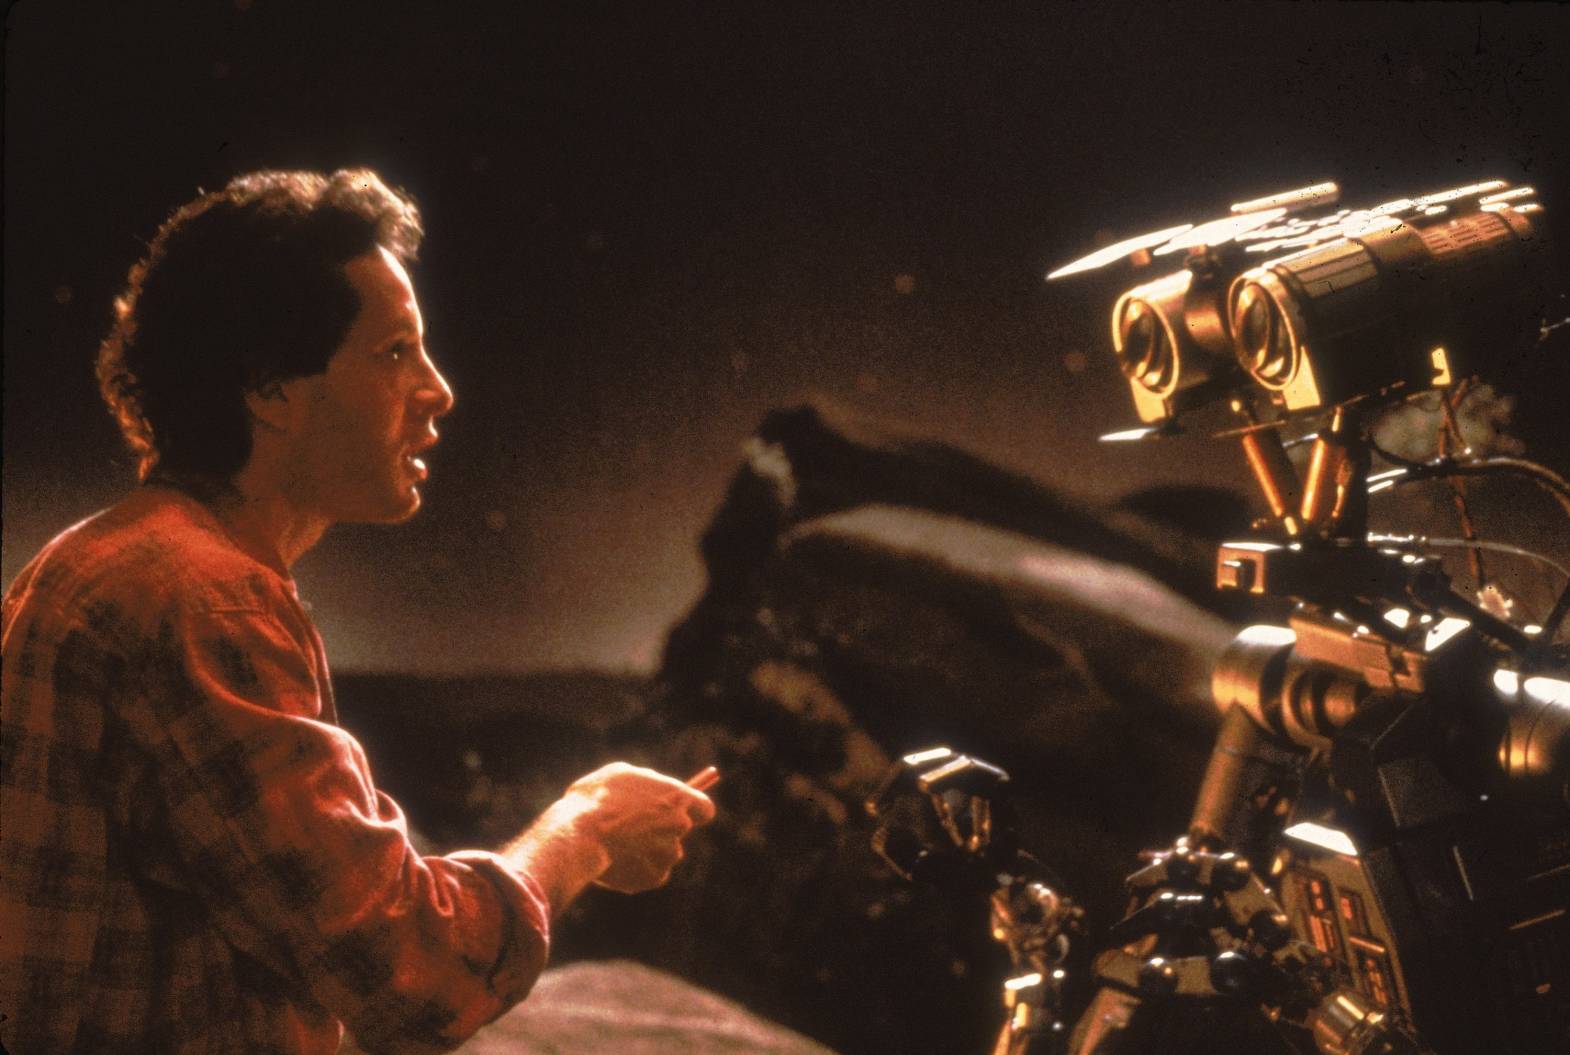 Short Circuit Movie Wallpaper Images Pictures   Becuo 1570x1055